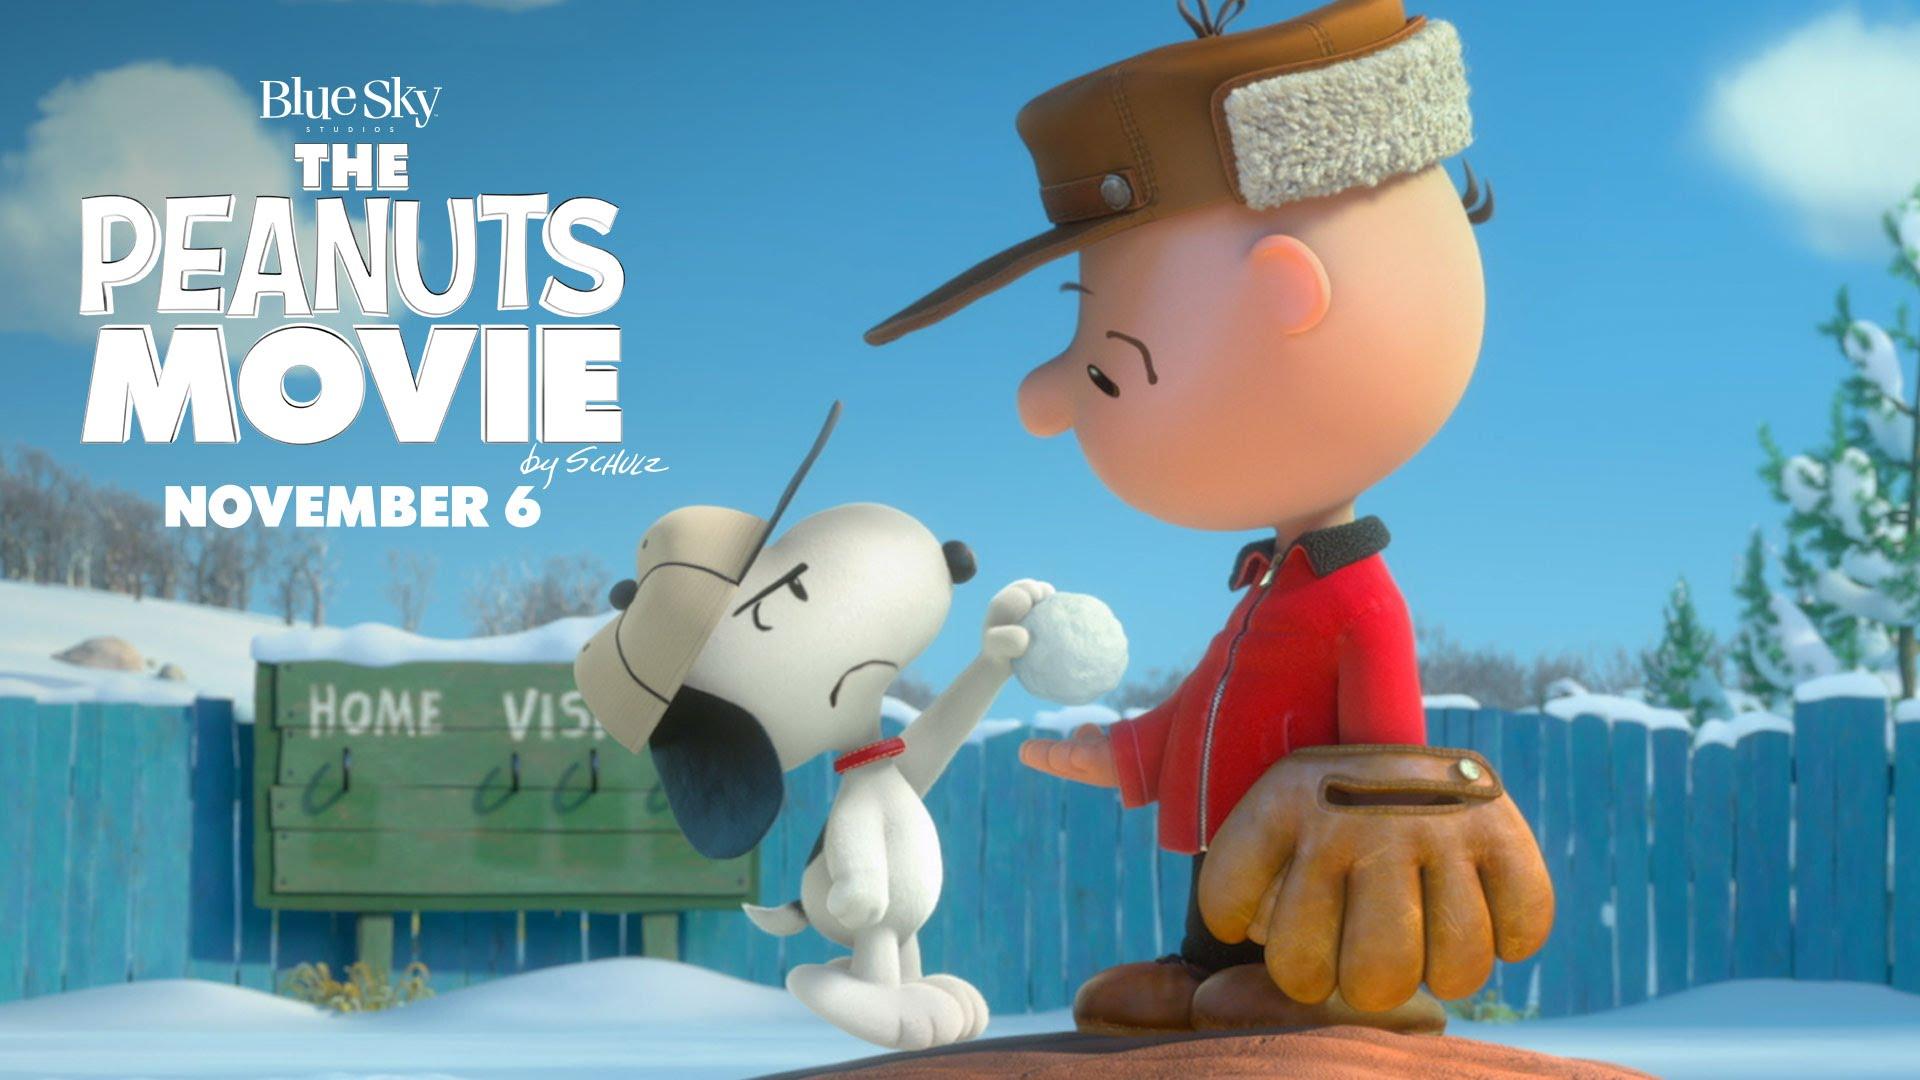 The Peanuts Movie. The Legacy Of Charles Schulz [HD]th Century